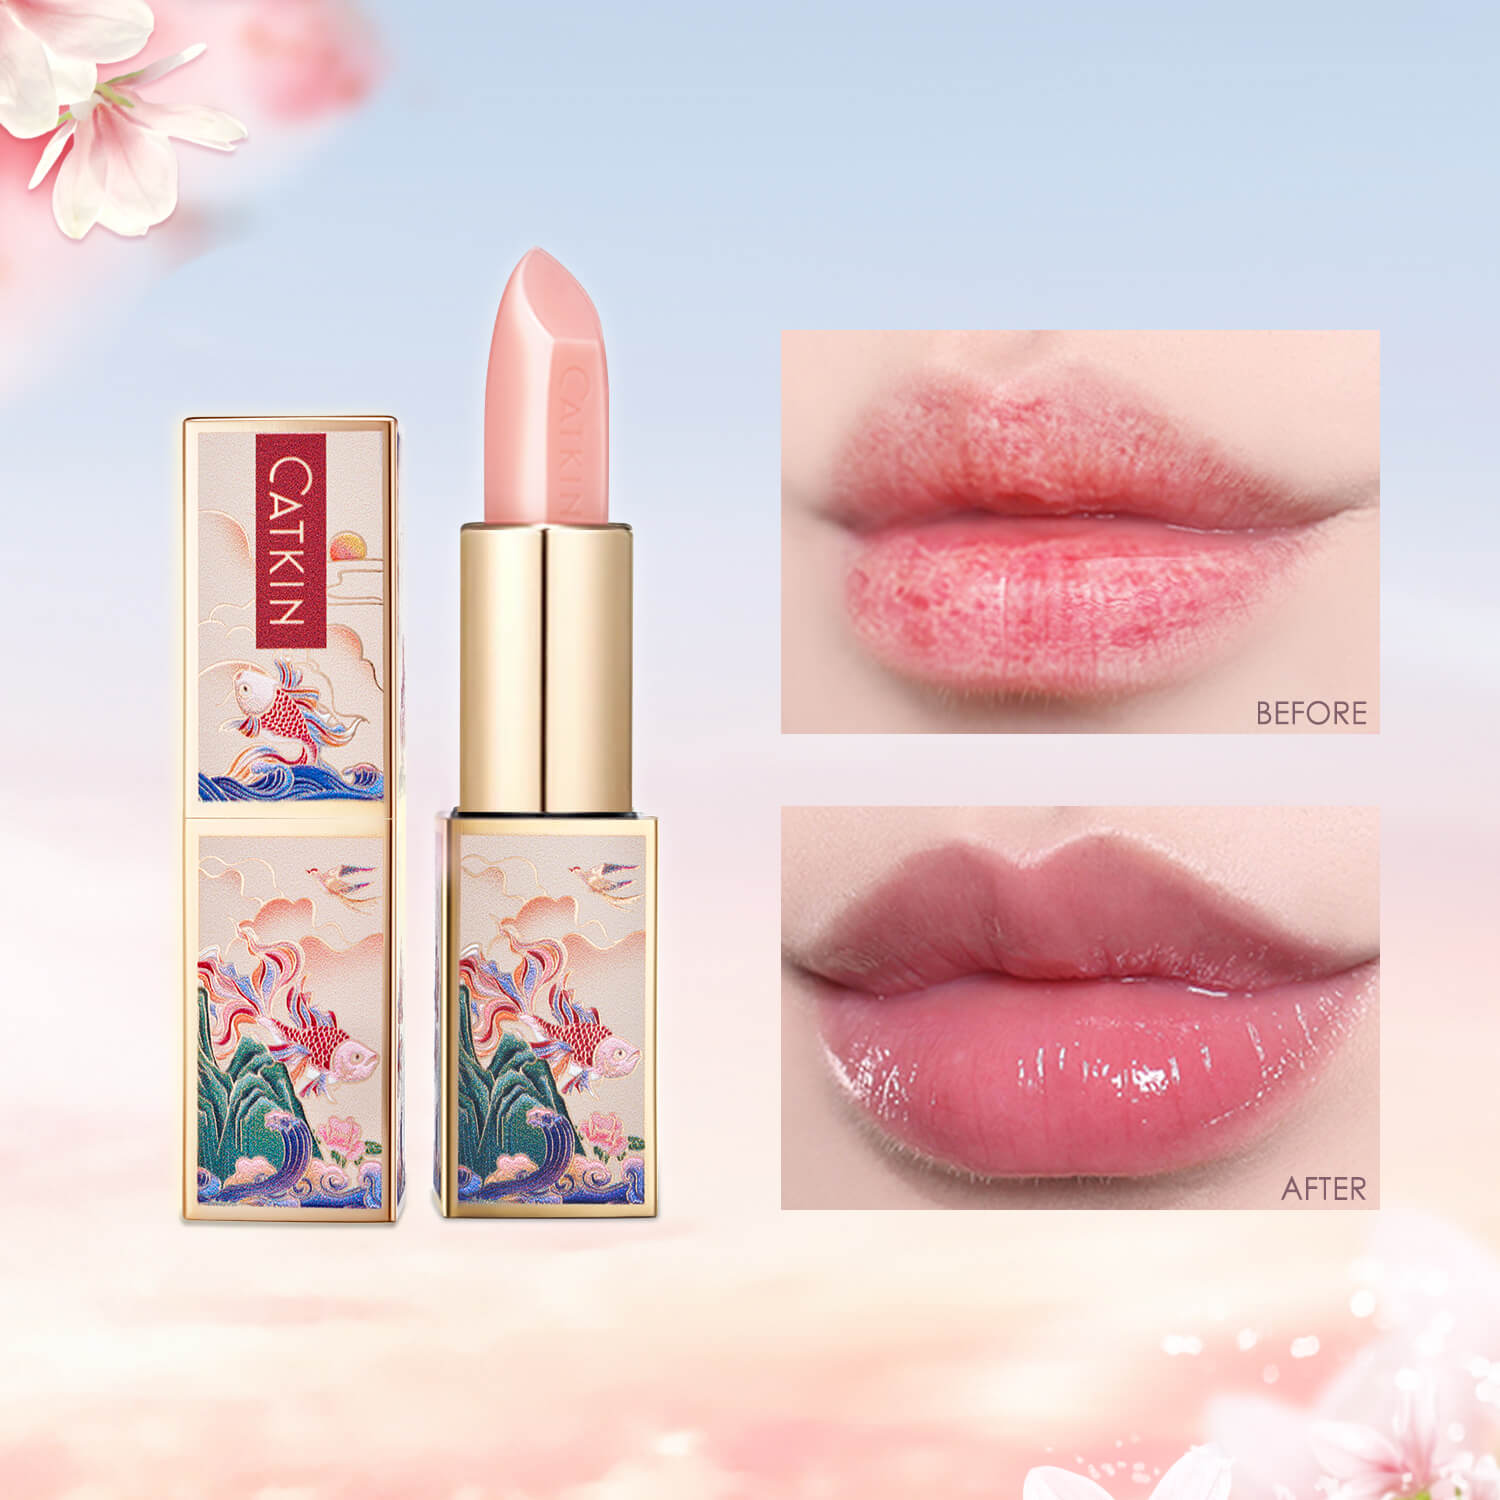 Catkin Lip Care Hydrating Lip Moisturizer For Soft Lips With Natural Ingredients